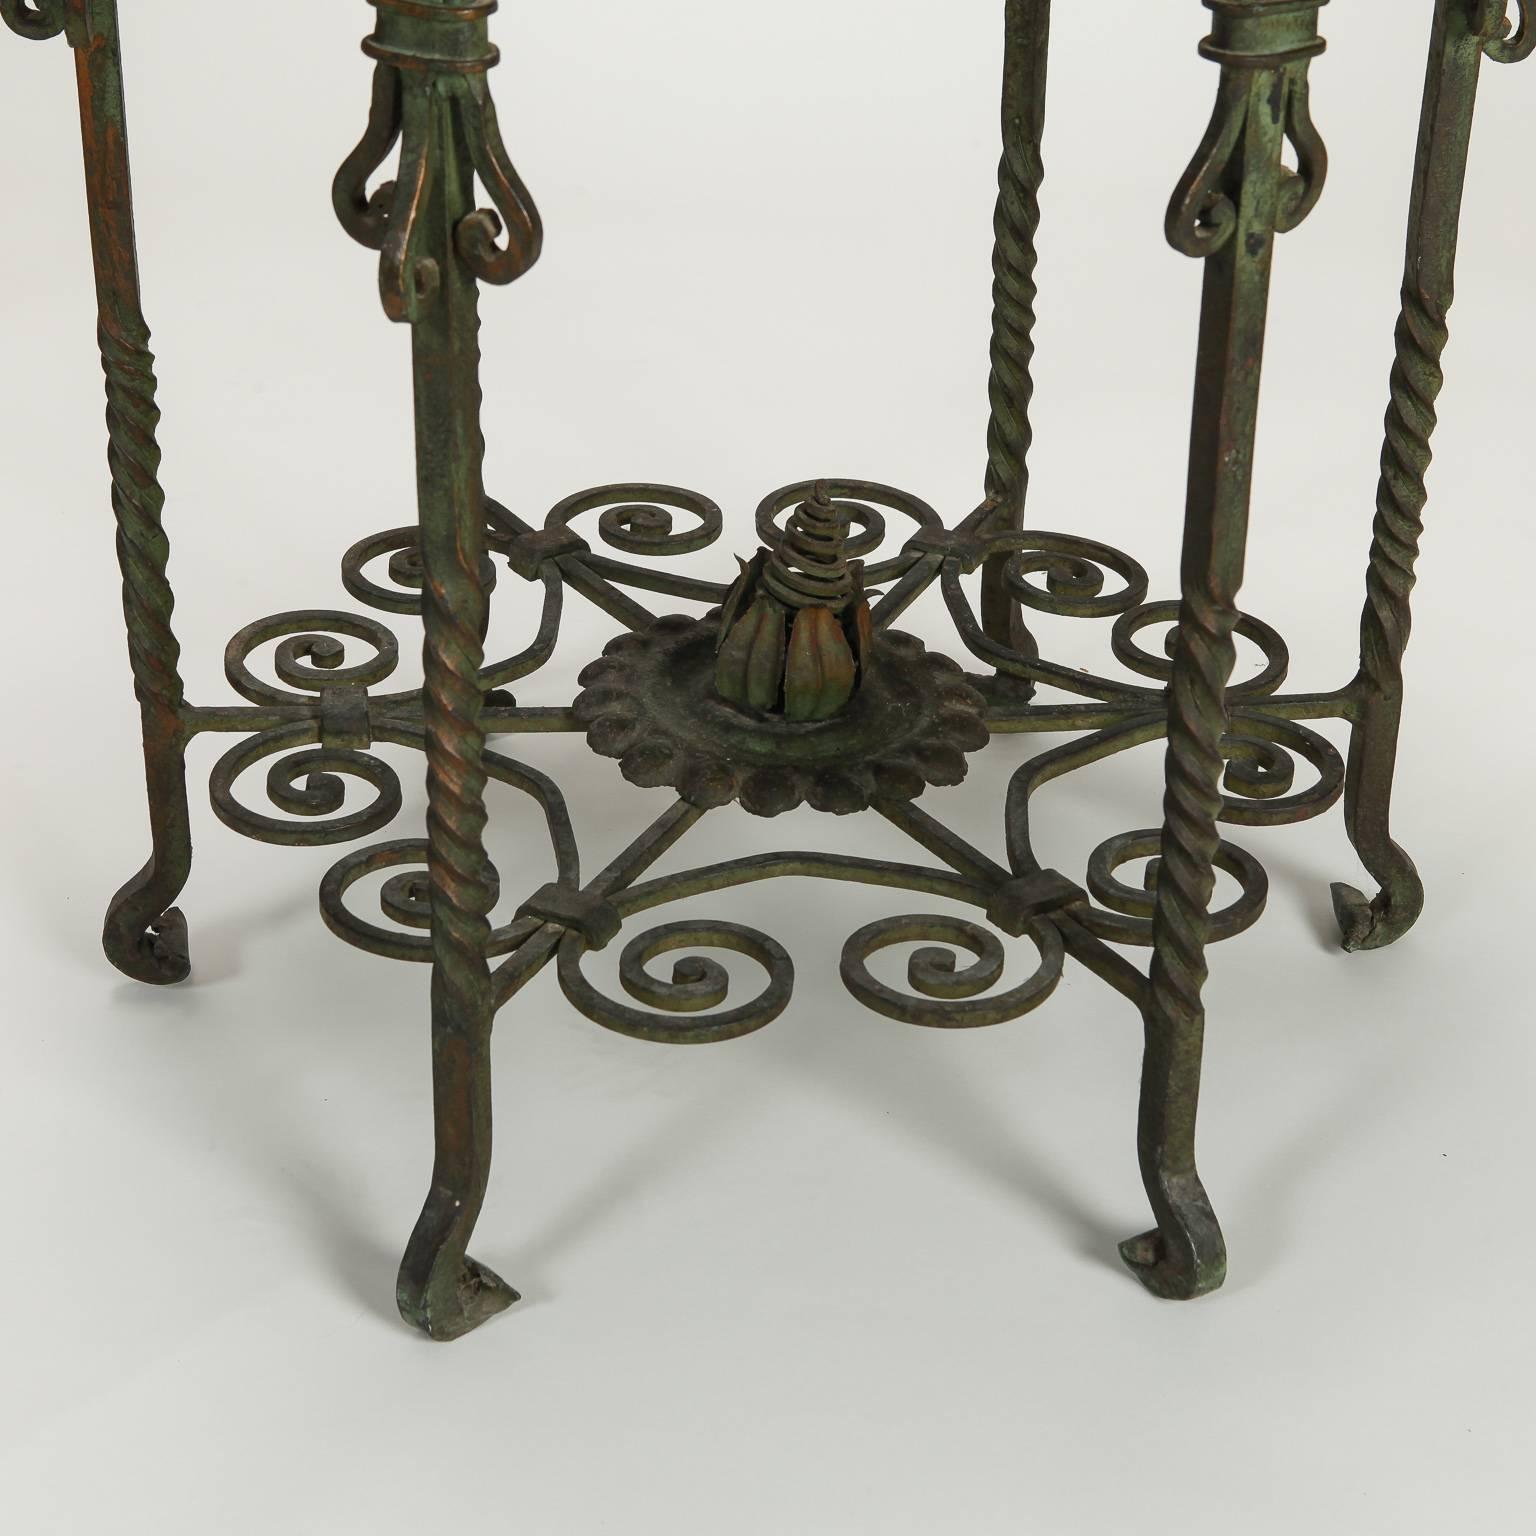 Italian Small Center Table with Marble Top and Elaborate Iron Base